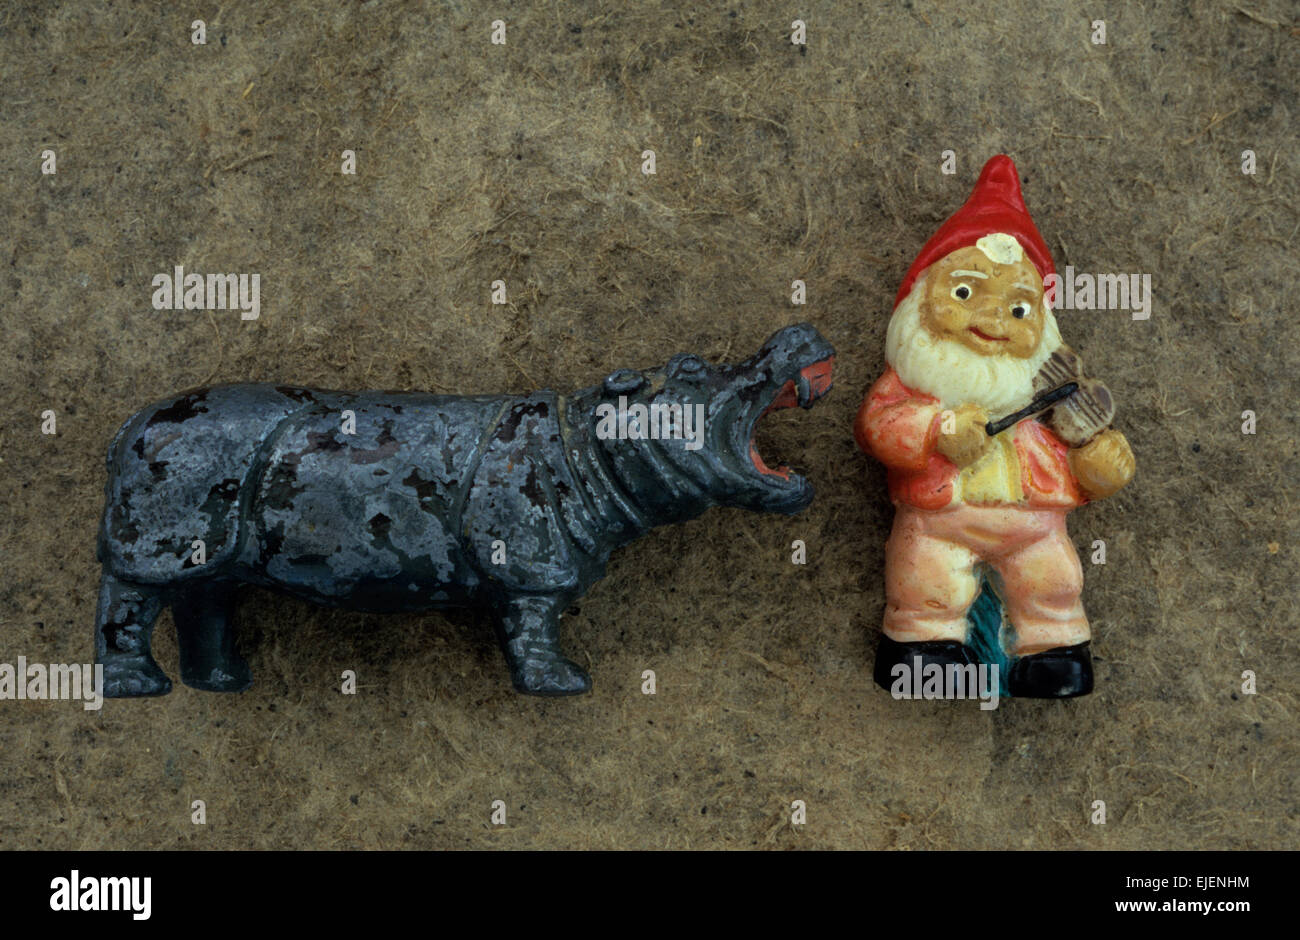 Toy models of hippopotamus with mouth wide open and gnome playing violin lying on antique card Stock Photo